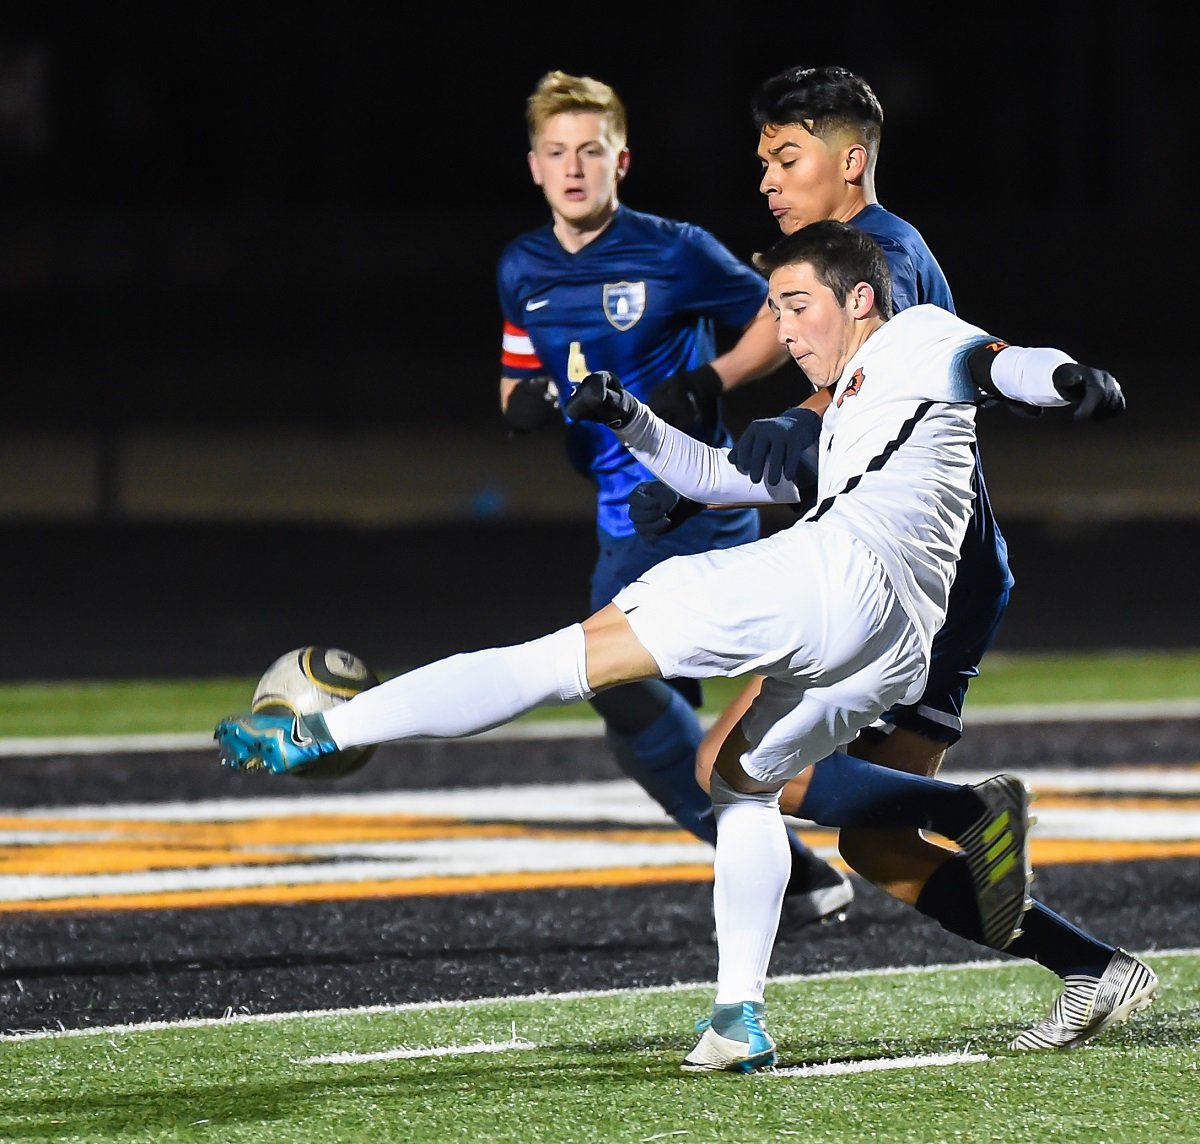 Aledo junior midfielder Brandon Wrinkle takes a shot that would find the back of the net for a goal Saturday night during the Bearcats' shootout loss to Arlington Heights. Wrinkle also scored in the shootout. Photo by Howard Hurd